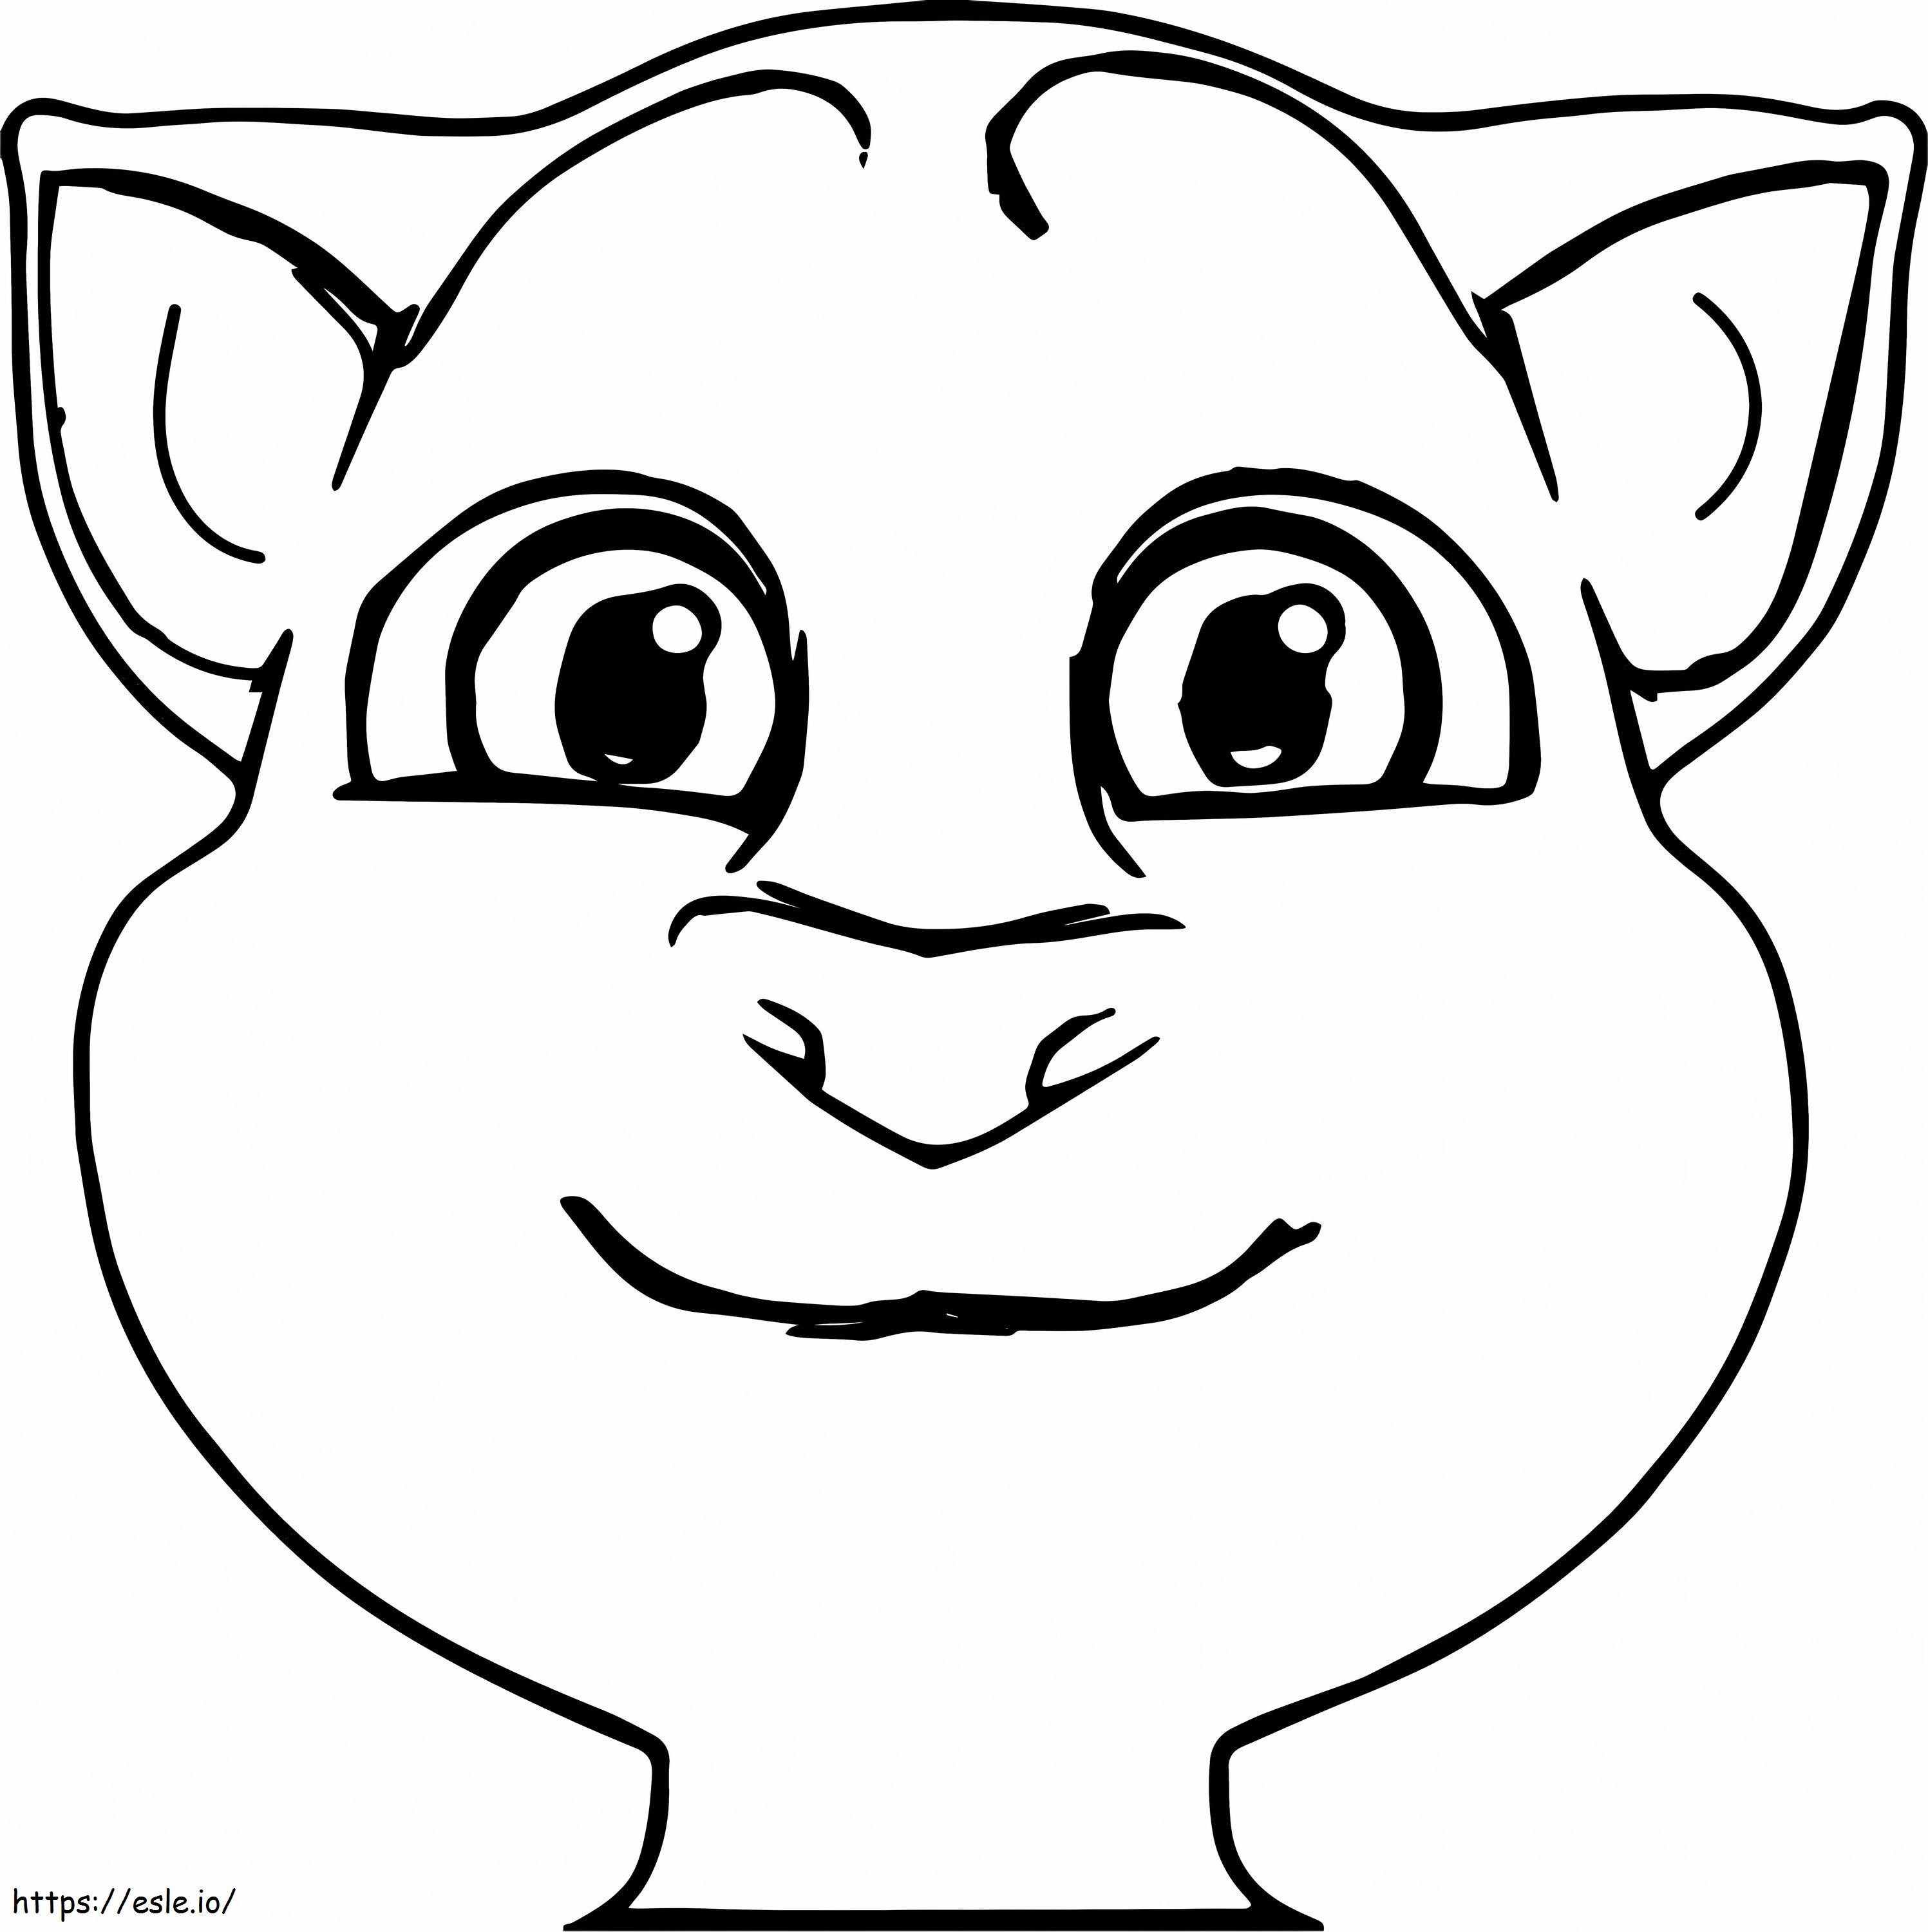 1528083725 Images 3 coloring page